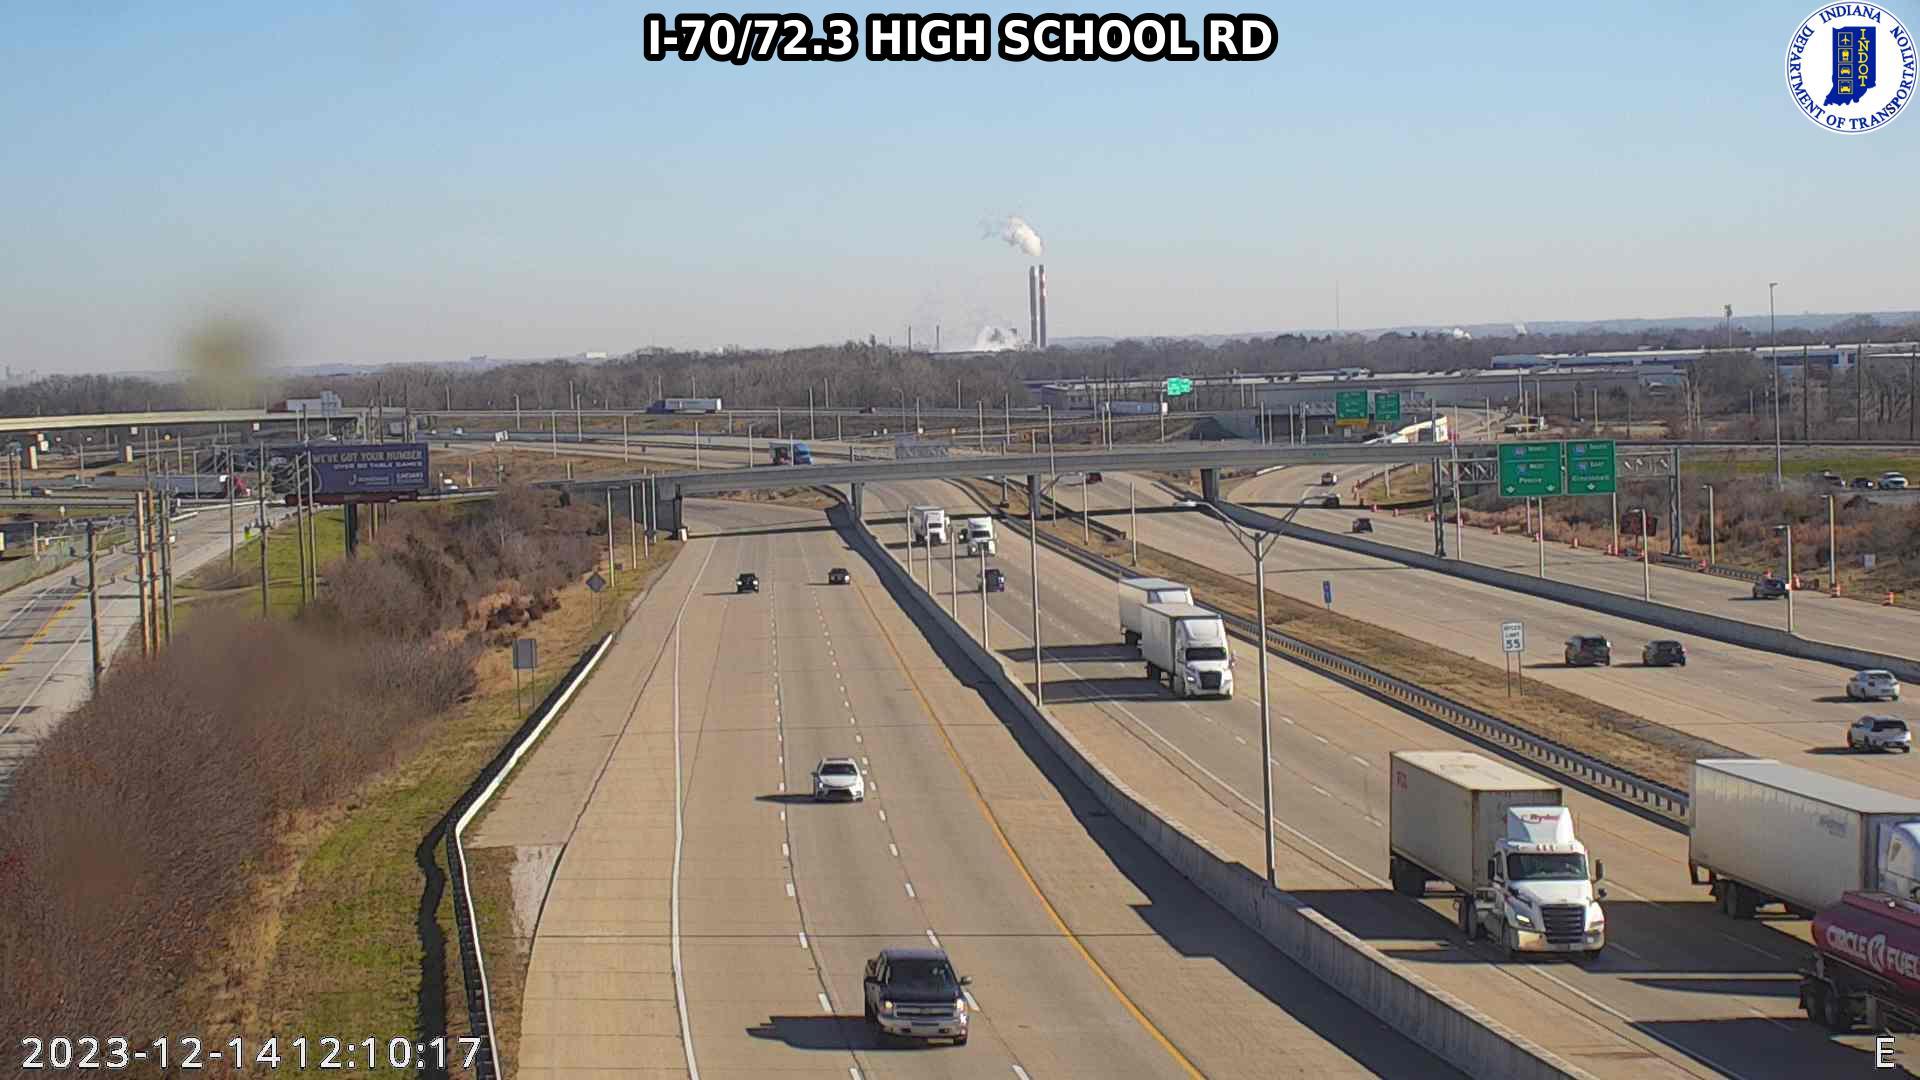 Traffic Cam Indianapolis: I-70: I-70/72.3 HIGH SCHOOL RD Player